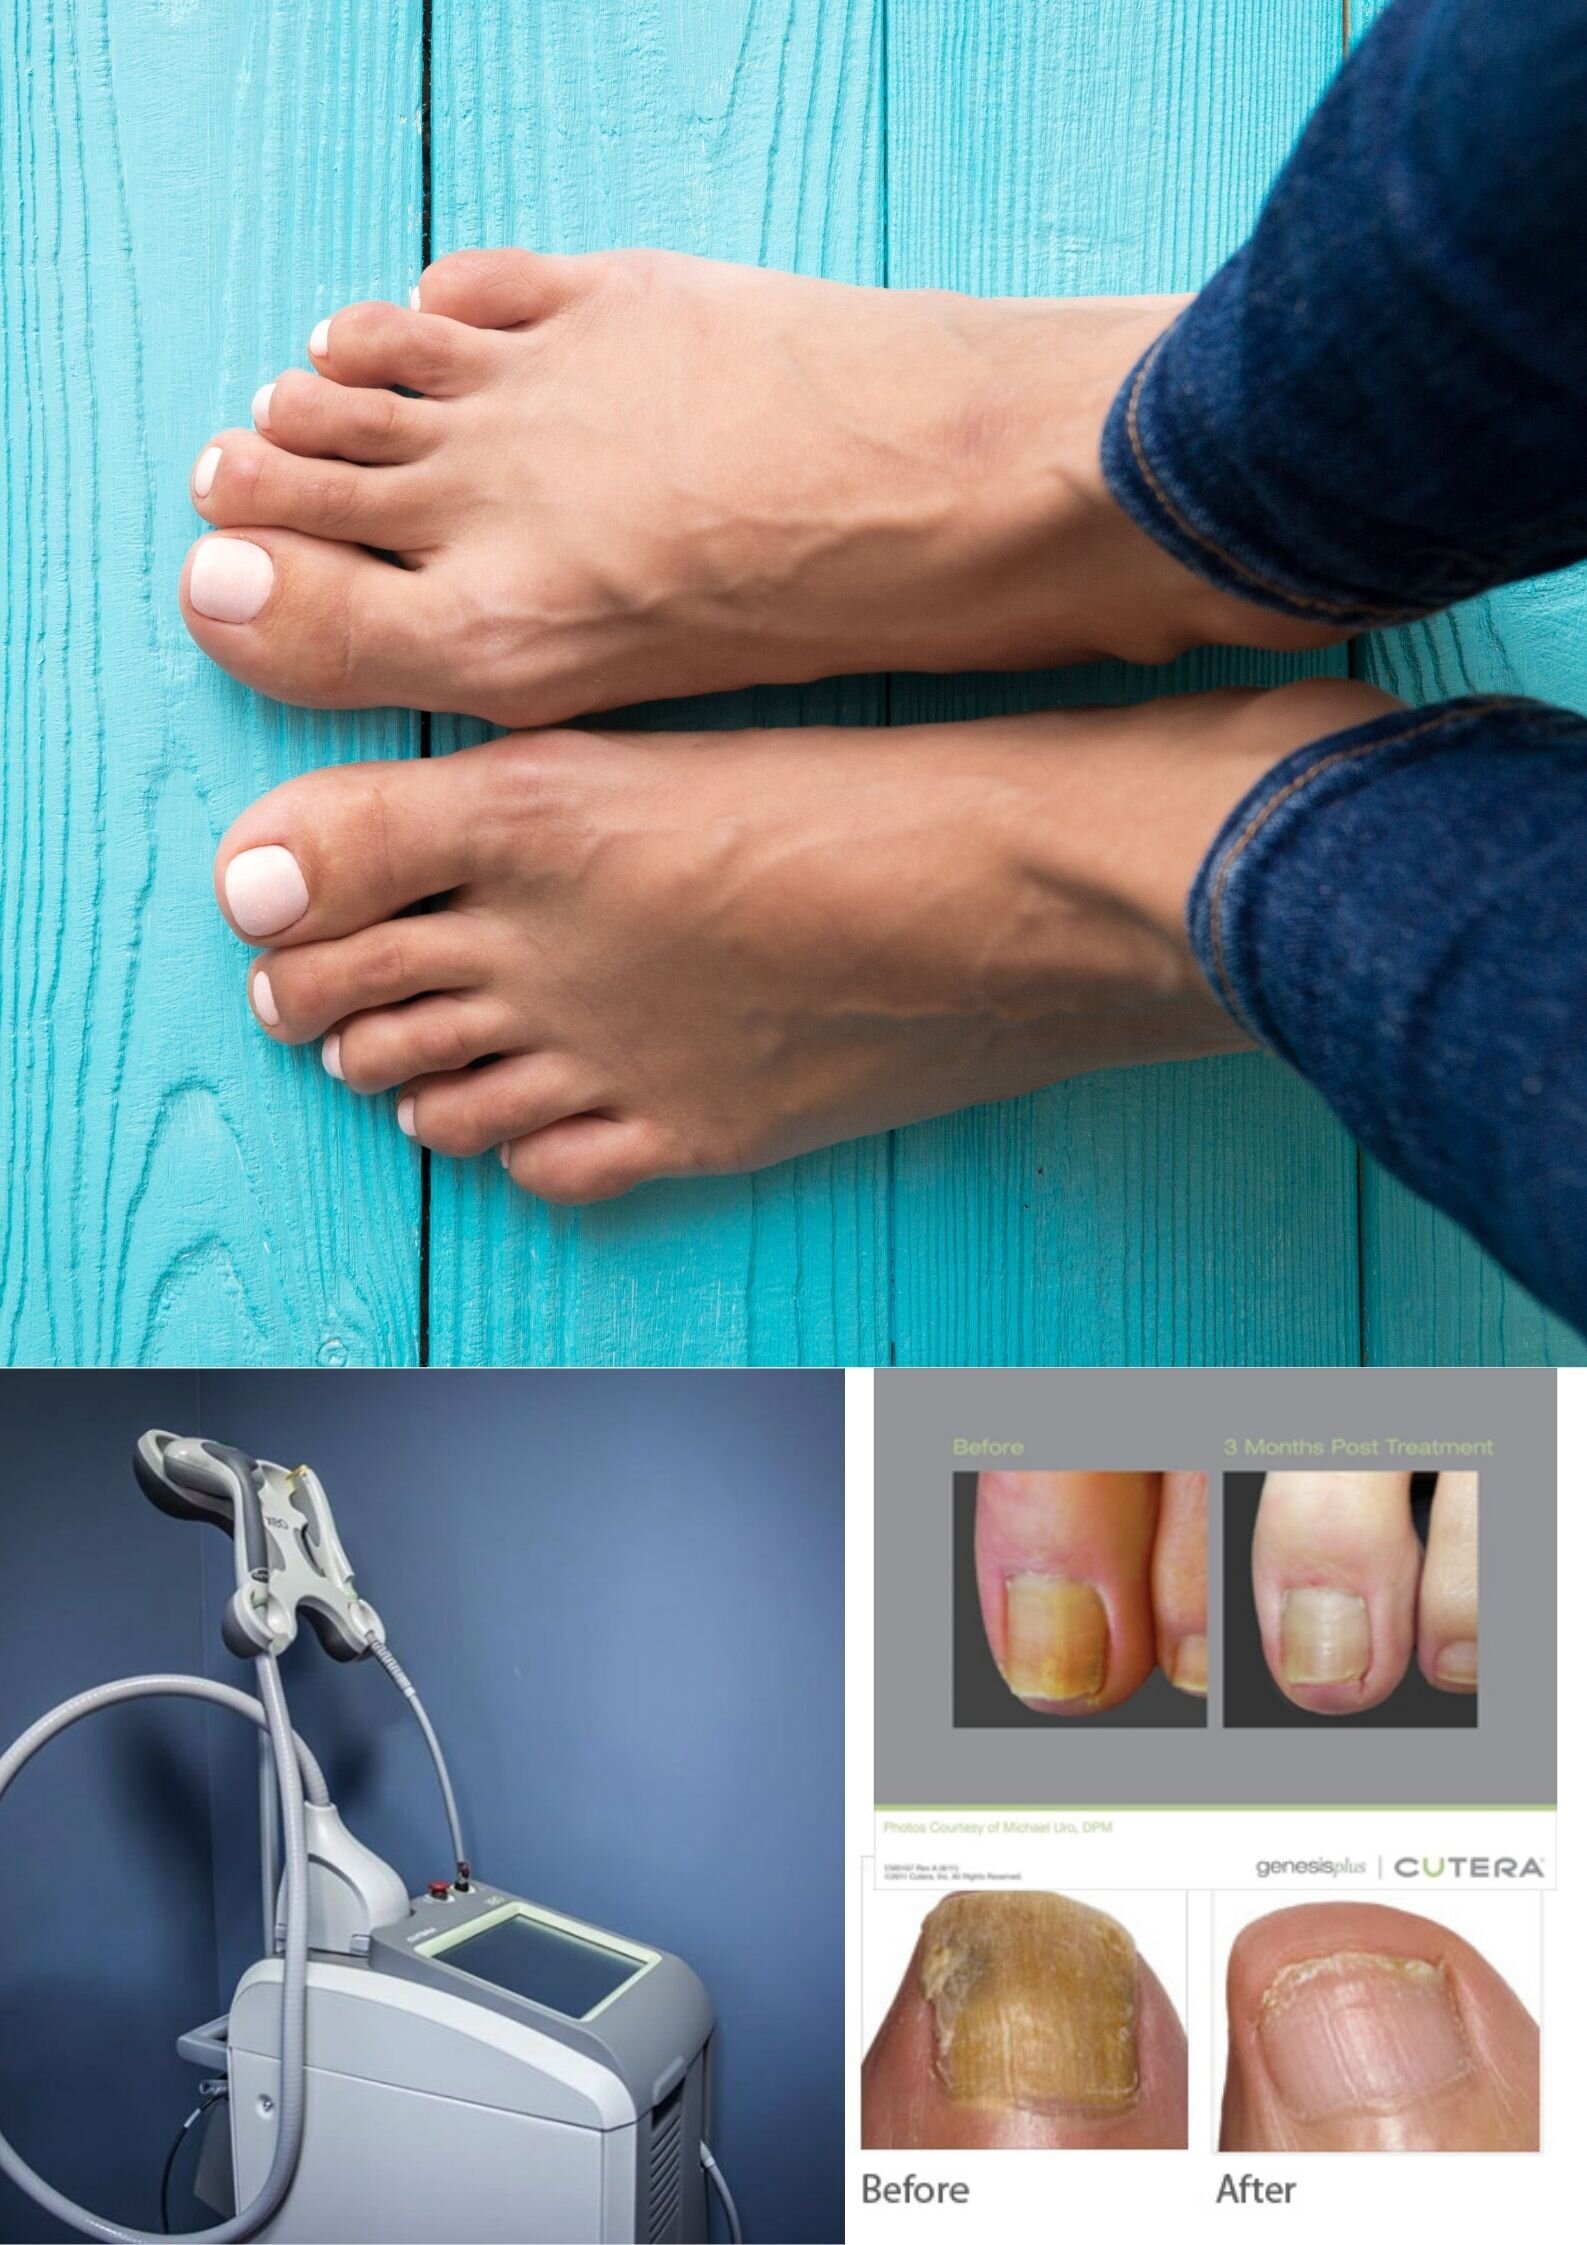 Home Remedies for Nail Fungus